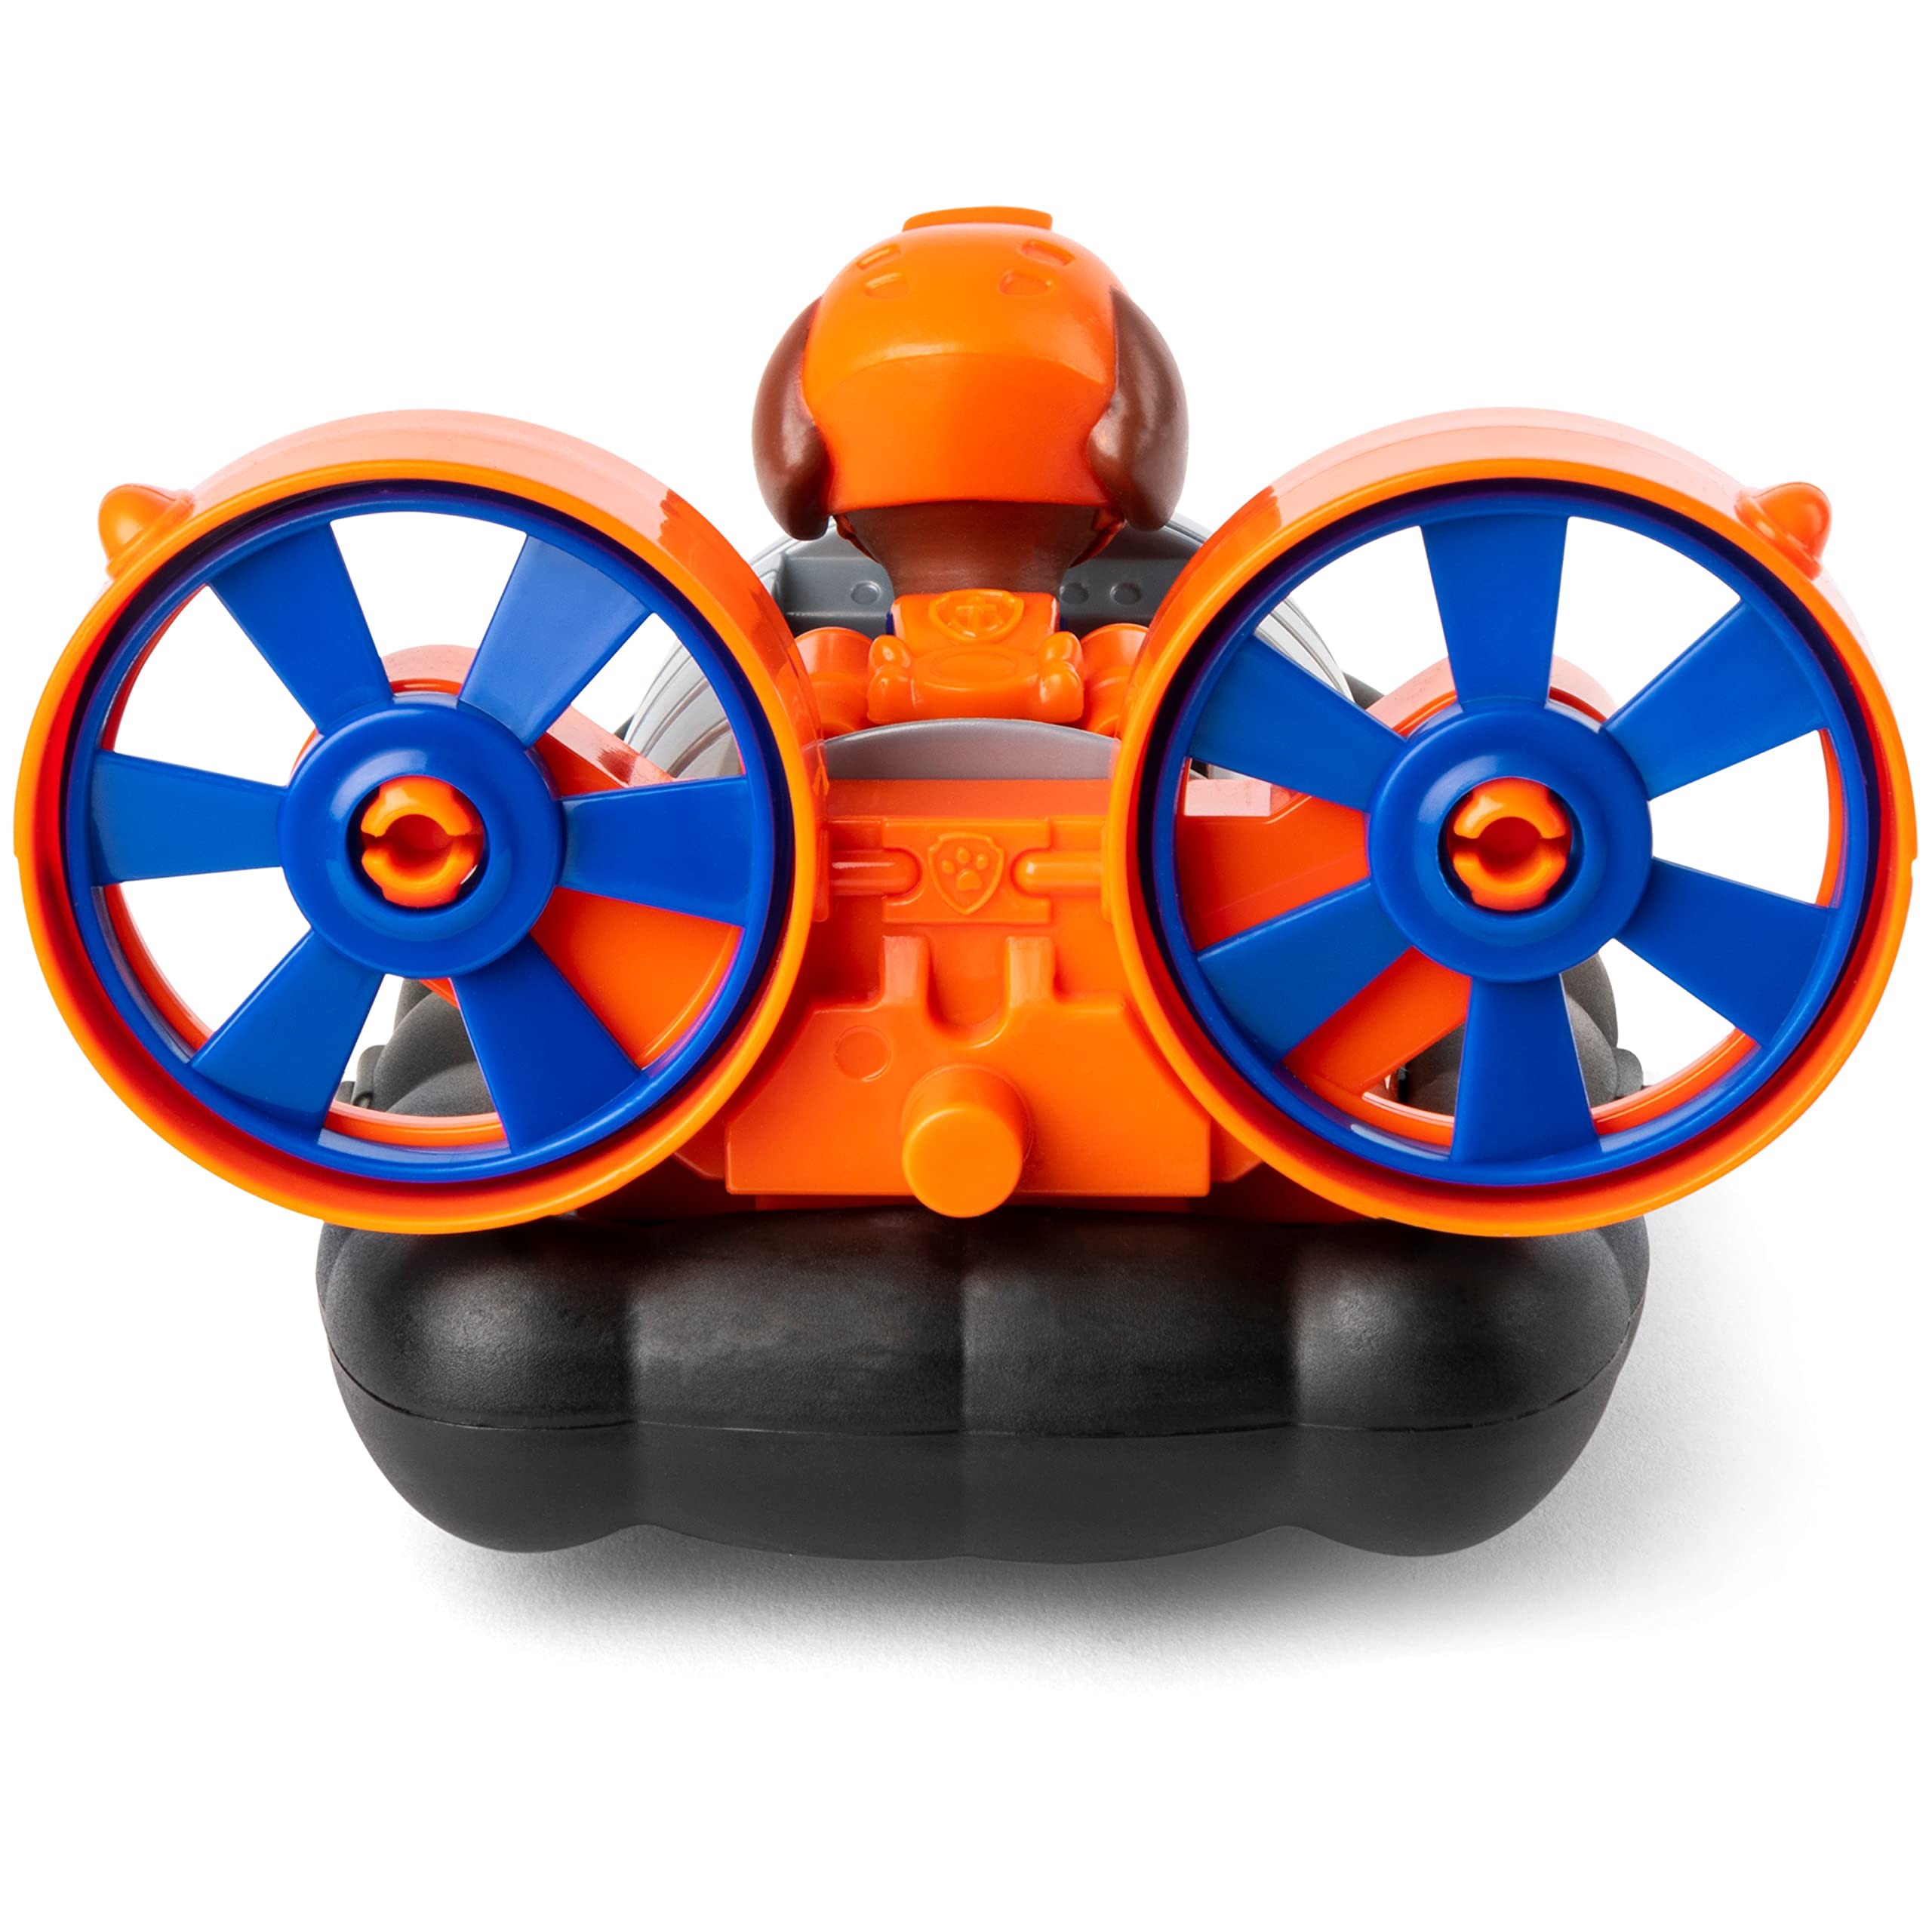 PAW Patrol, Zuma’s Hovercraft Vehicle With Collectible Figure, For Kids Aged 3 And Up